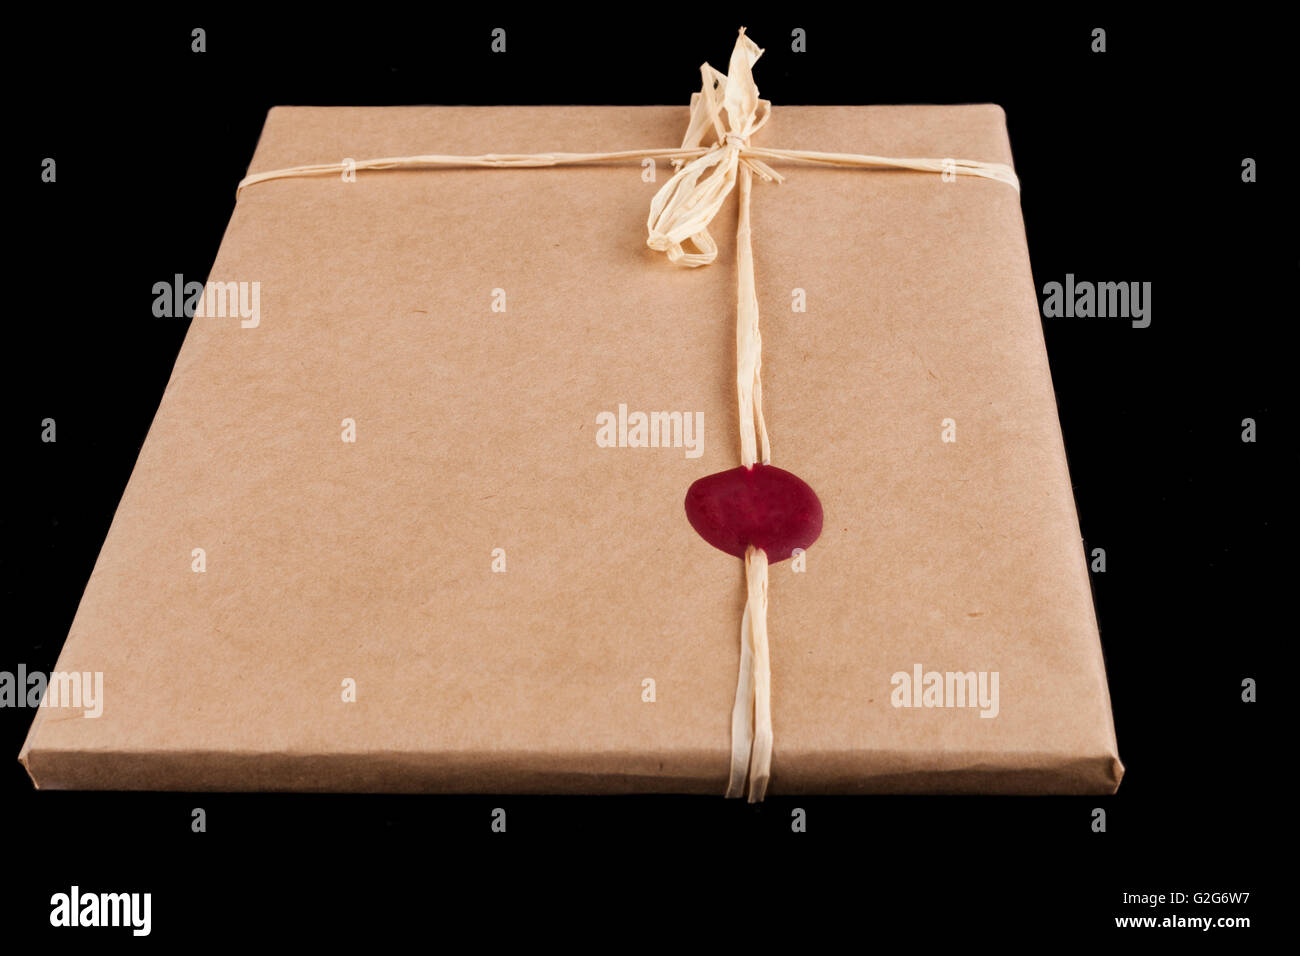 https://c8.alamy.com/comp/G2G6W7/old-brown-wrapping-paper-gift-close-up-with-tied-bow-and-red-wax-seal-G2G6W7.jpg